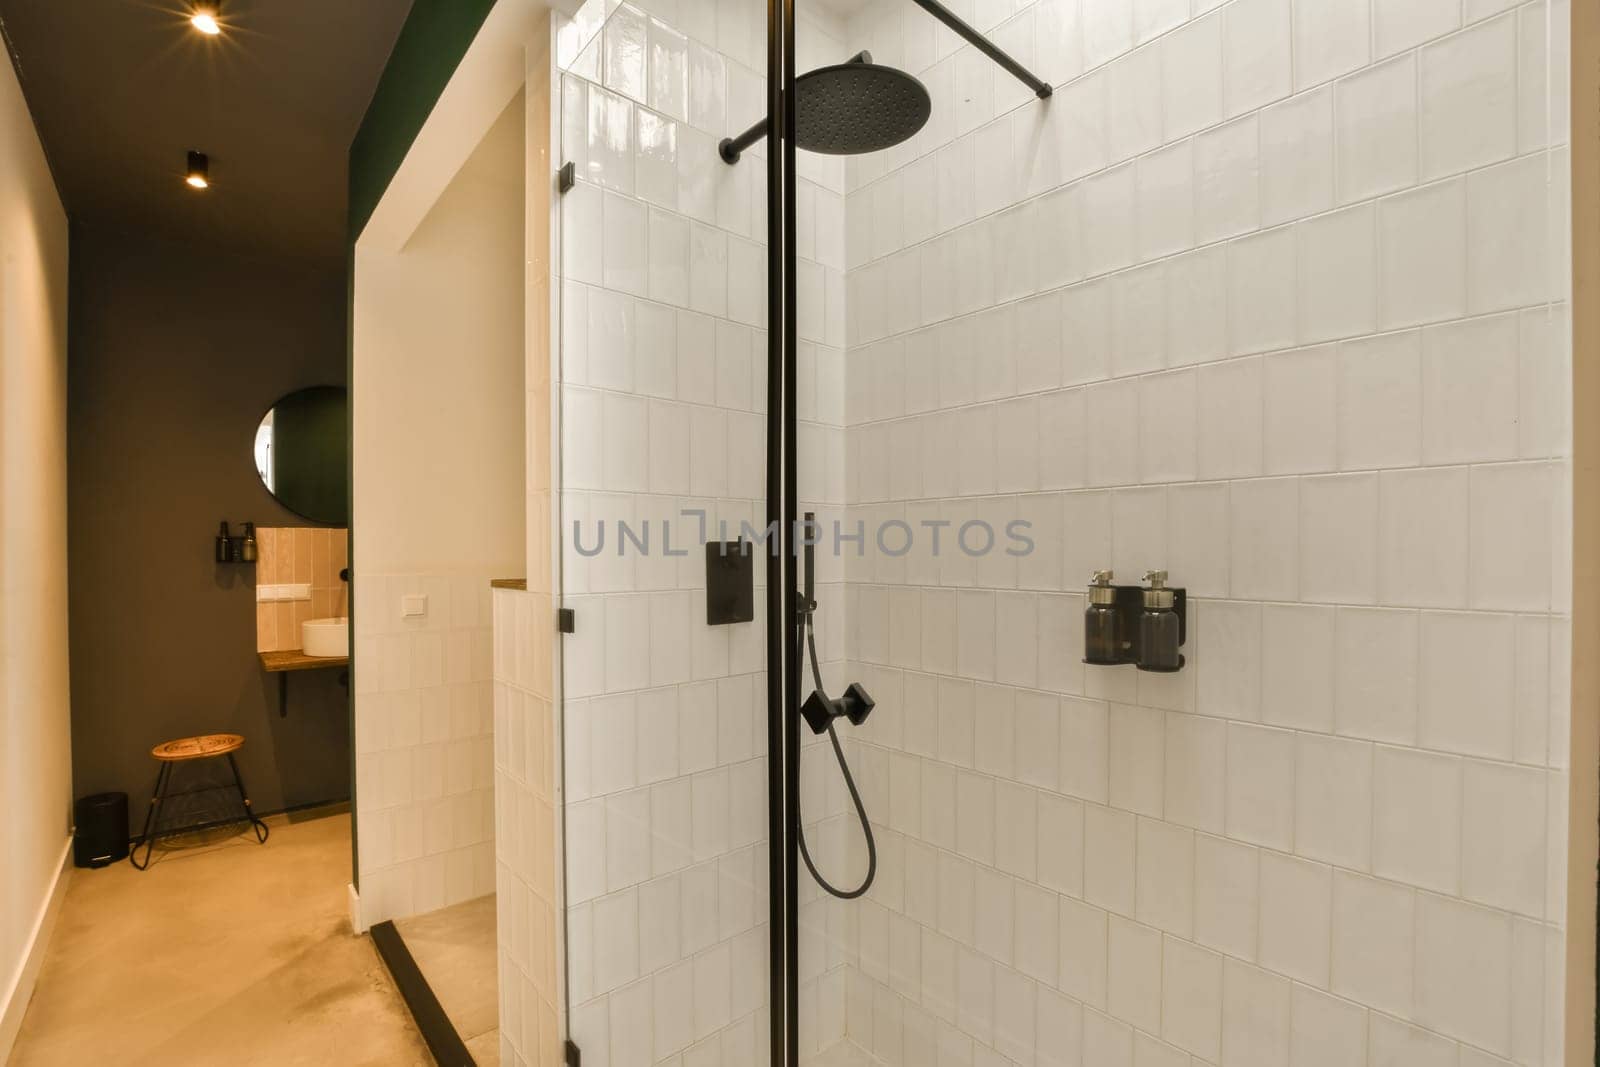 a shower in a bathroom with white tiled walls by casamedia